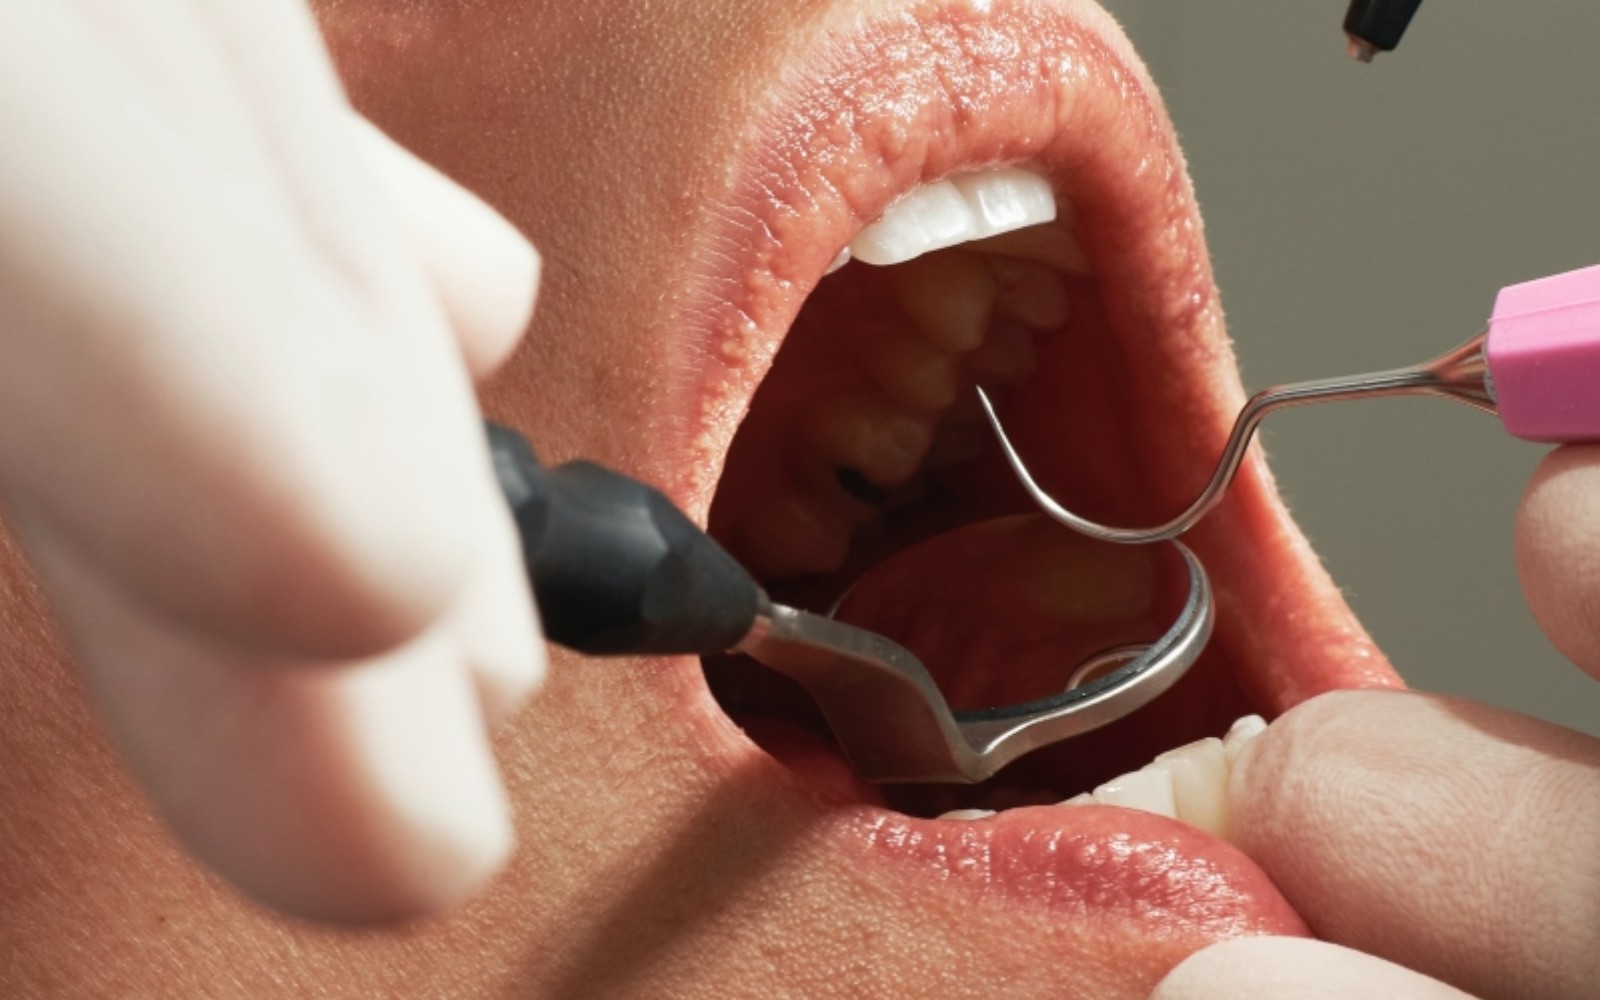 Cuts in the Mouth: How to Treat and Prevent Oral Wounds